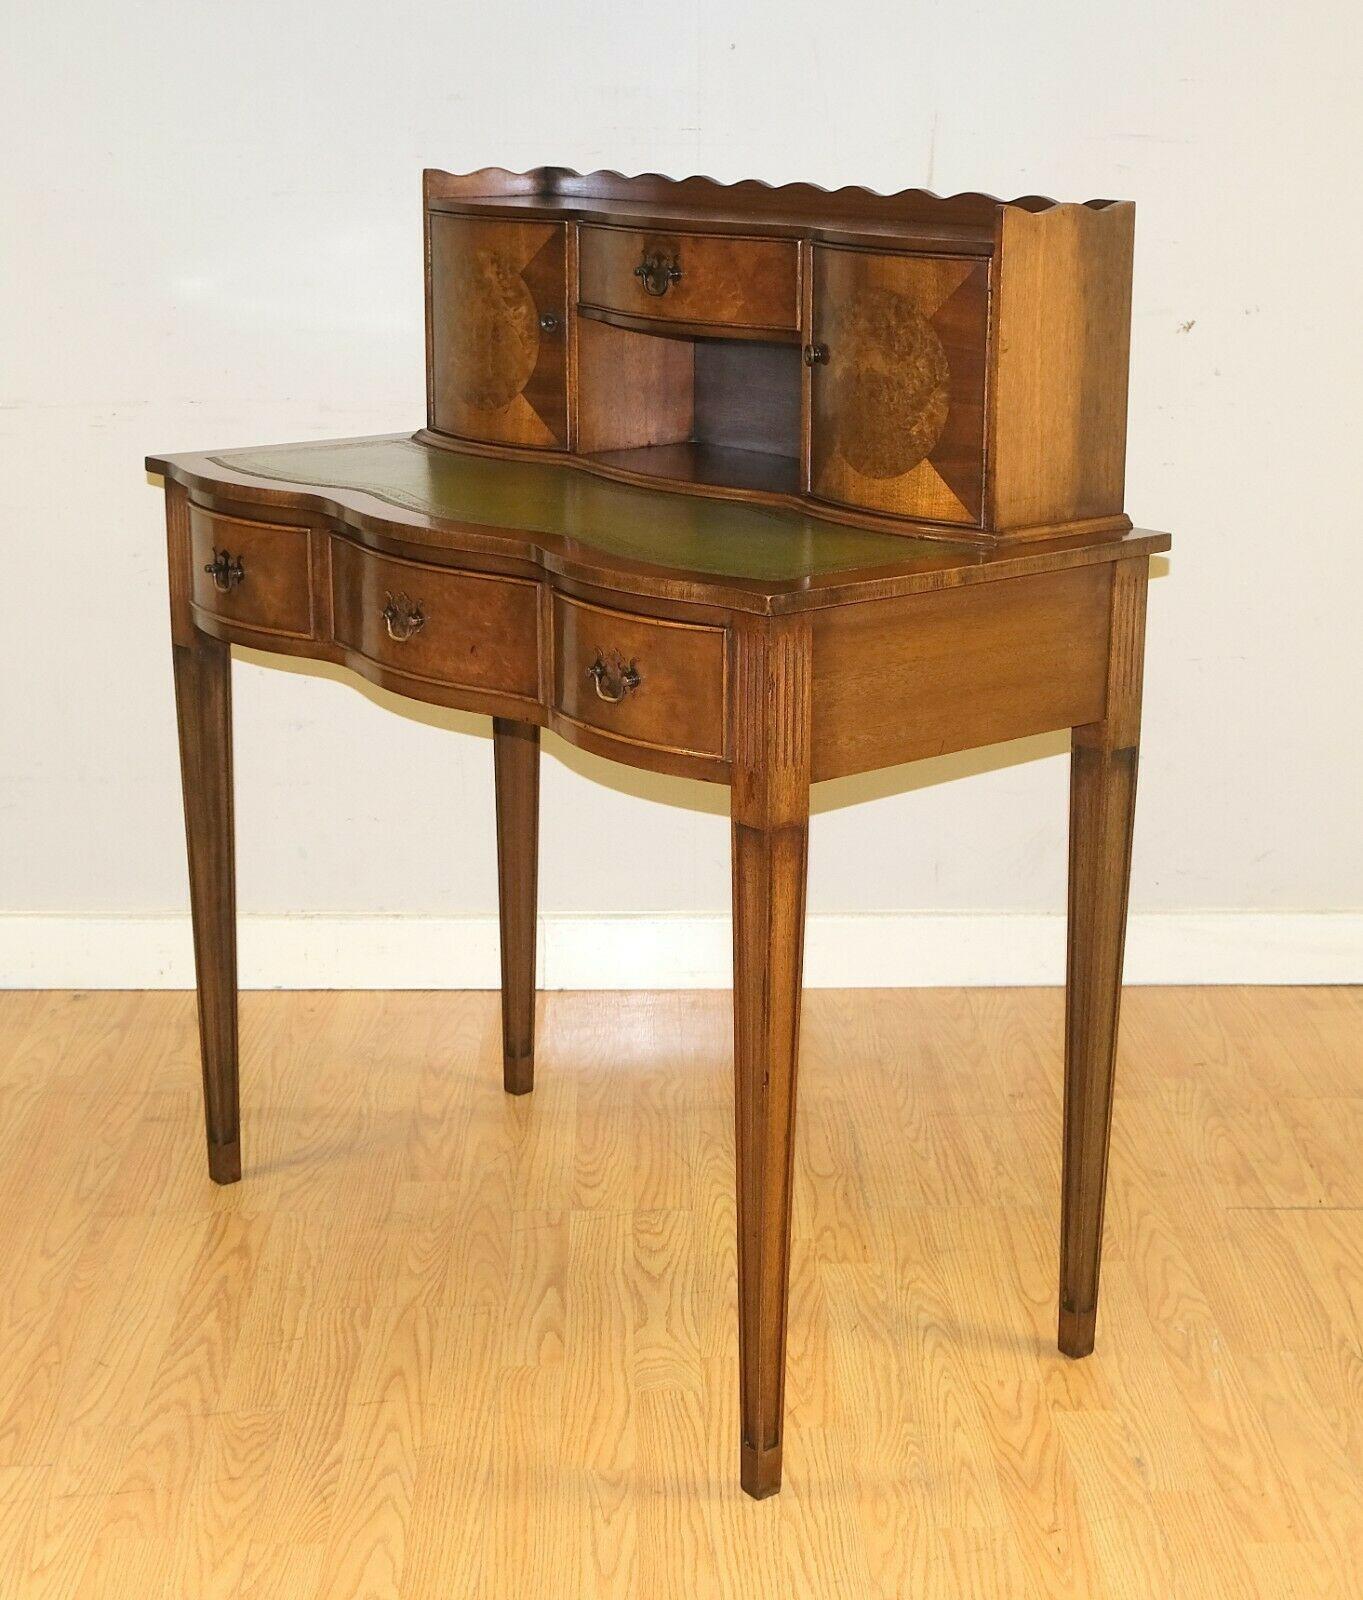 We are delighted to offer for sale this stunning Bevan Funnell Reprox Mahogany writing desk.

This lovely and well made desk offers you three drawers and two cupboards, ideal to keep your papers tidy. The desk stands on tapered and moulded legs,